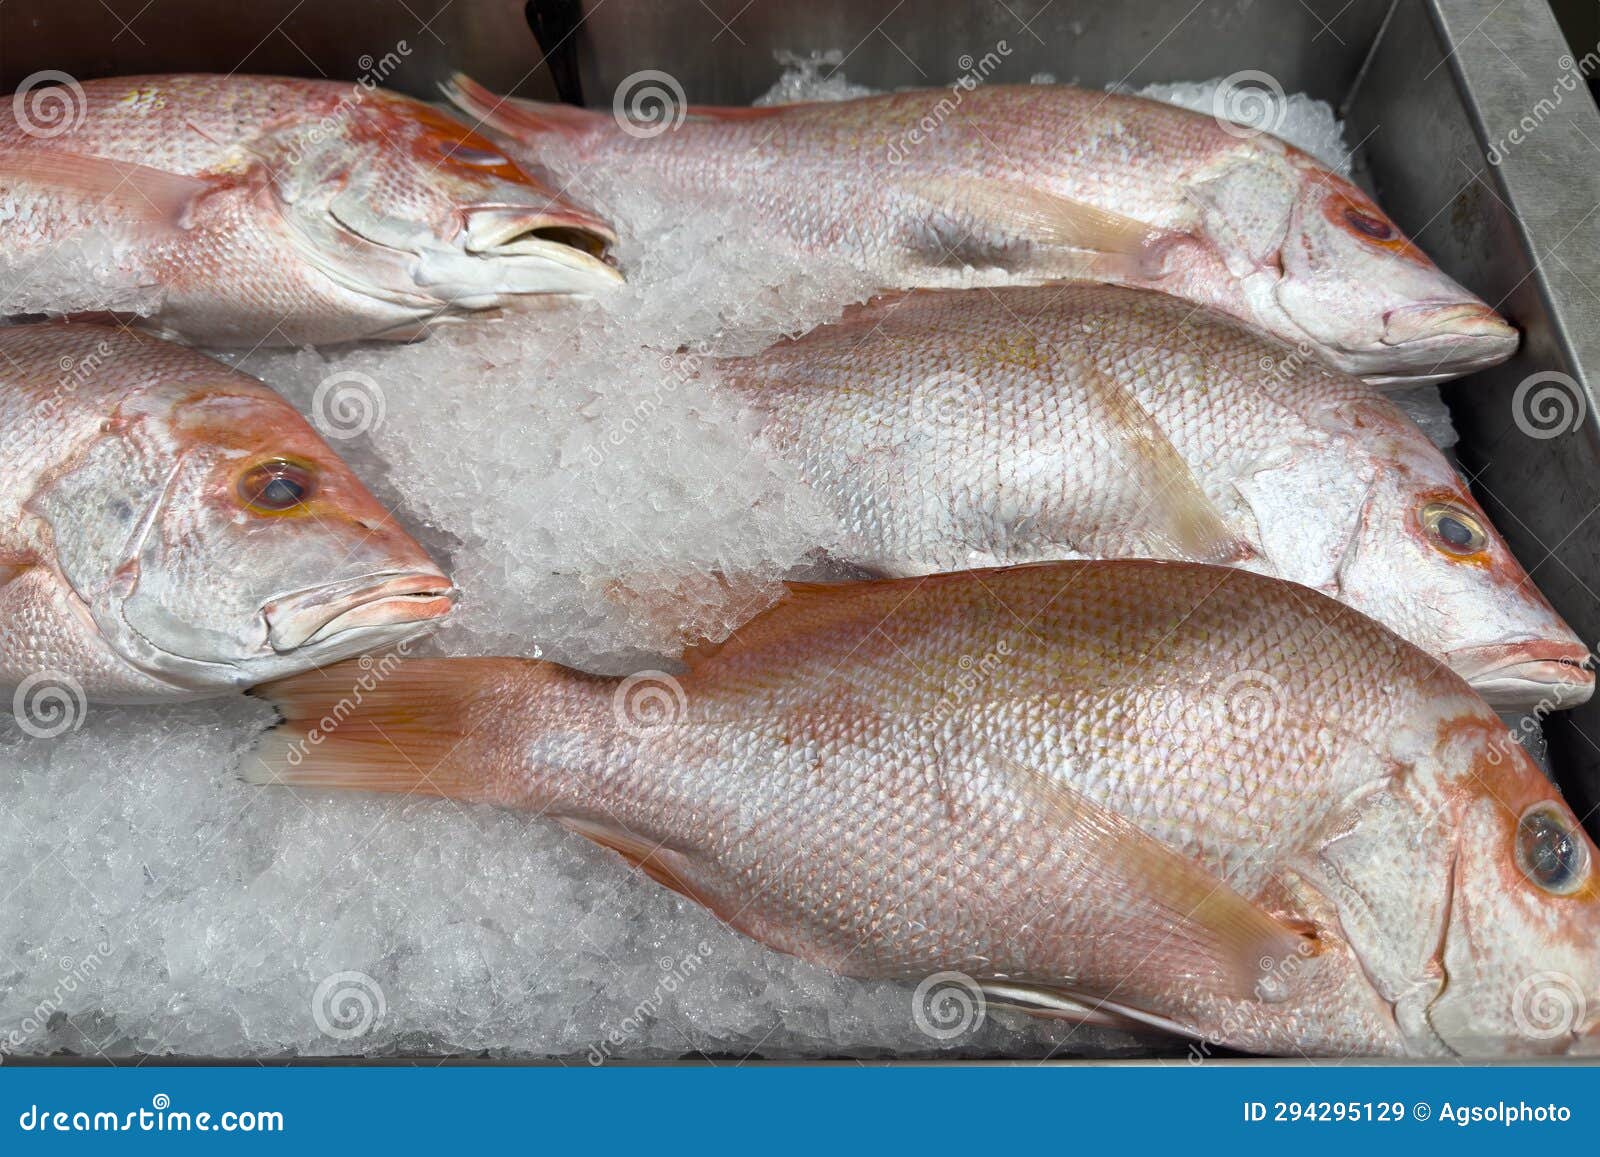 Frozen Sea Bass in a Store Close-up. Selection of Frozen Fish in a